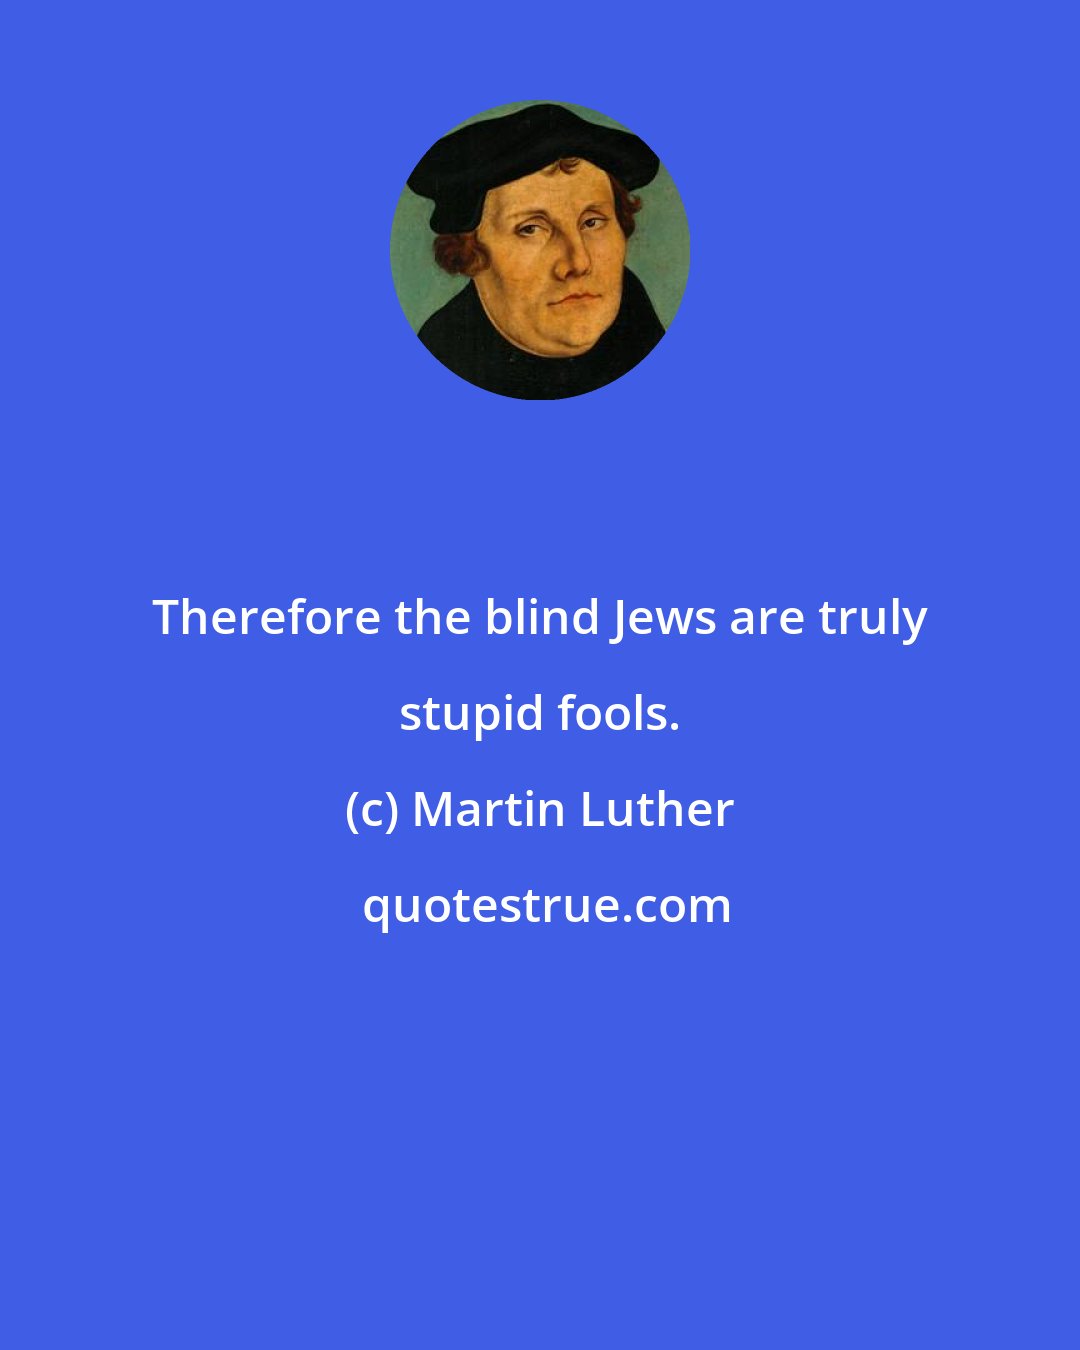 Martin Luther: Therefore the blind Jews are truly stupid fools.